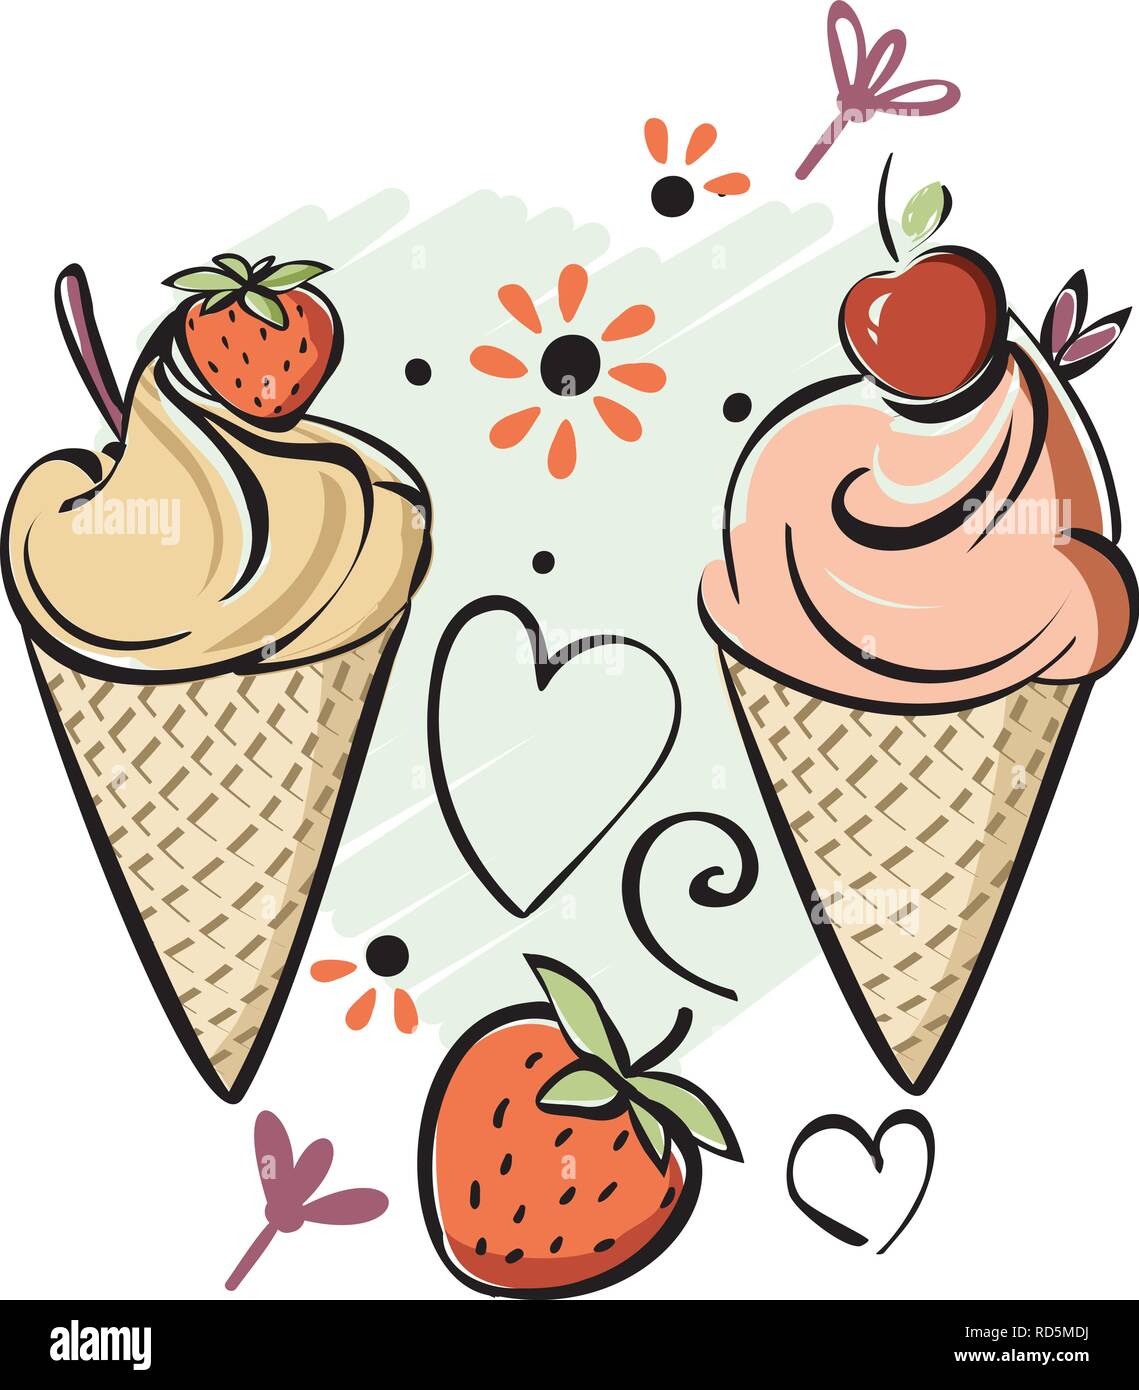 Ice Cream Cone Drawing - How To Draw An Ice Cream Cone Step By Step-saigonsouth.com.vn